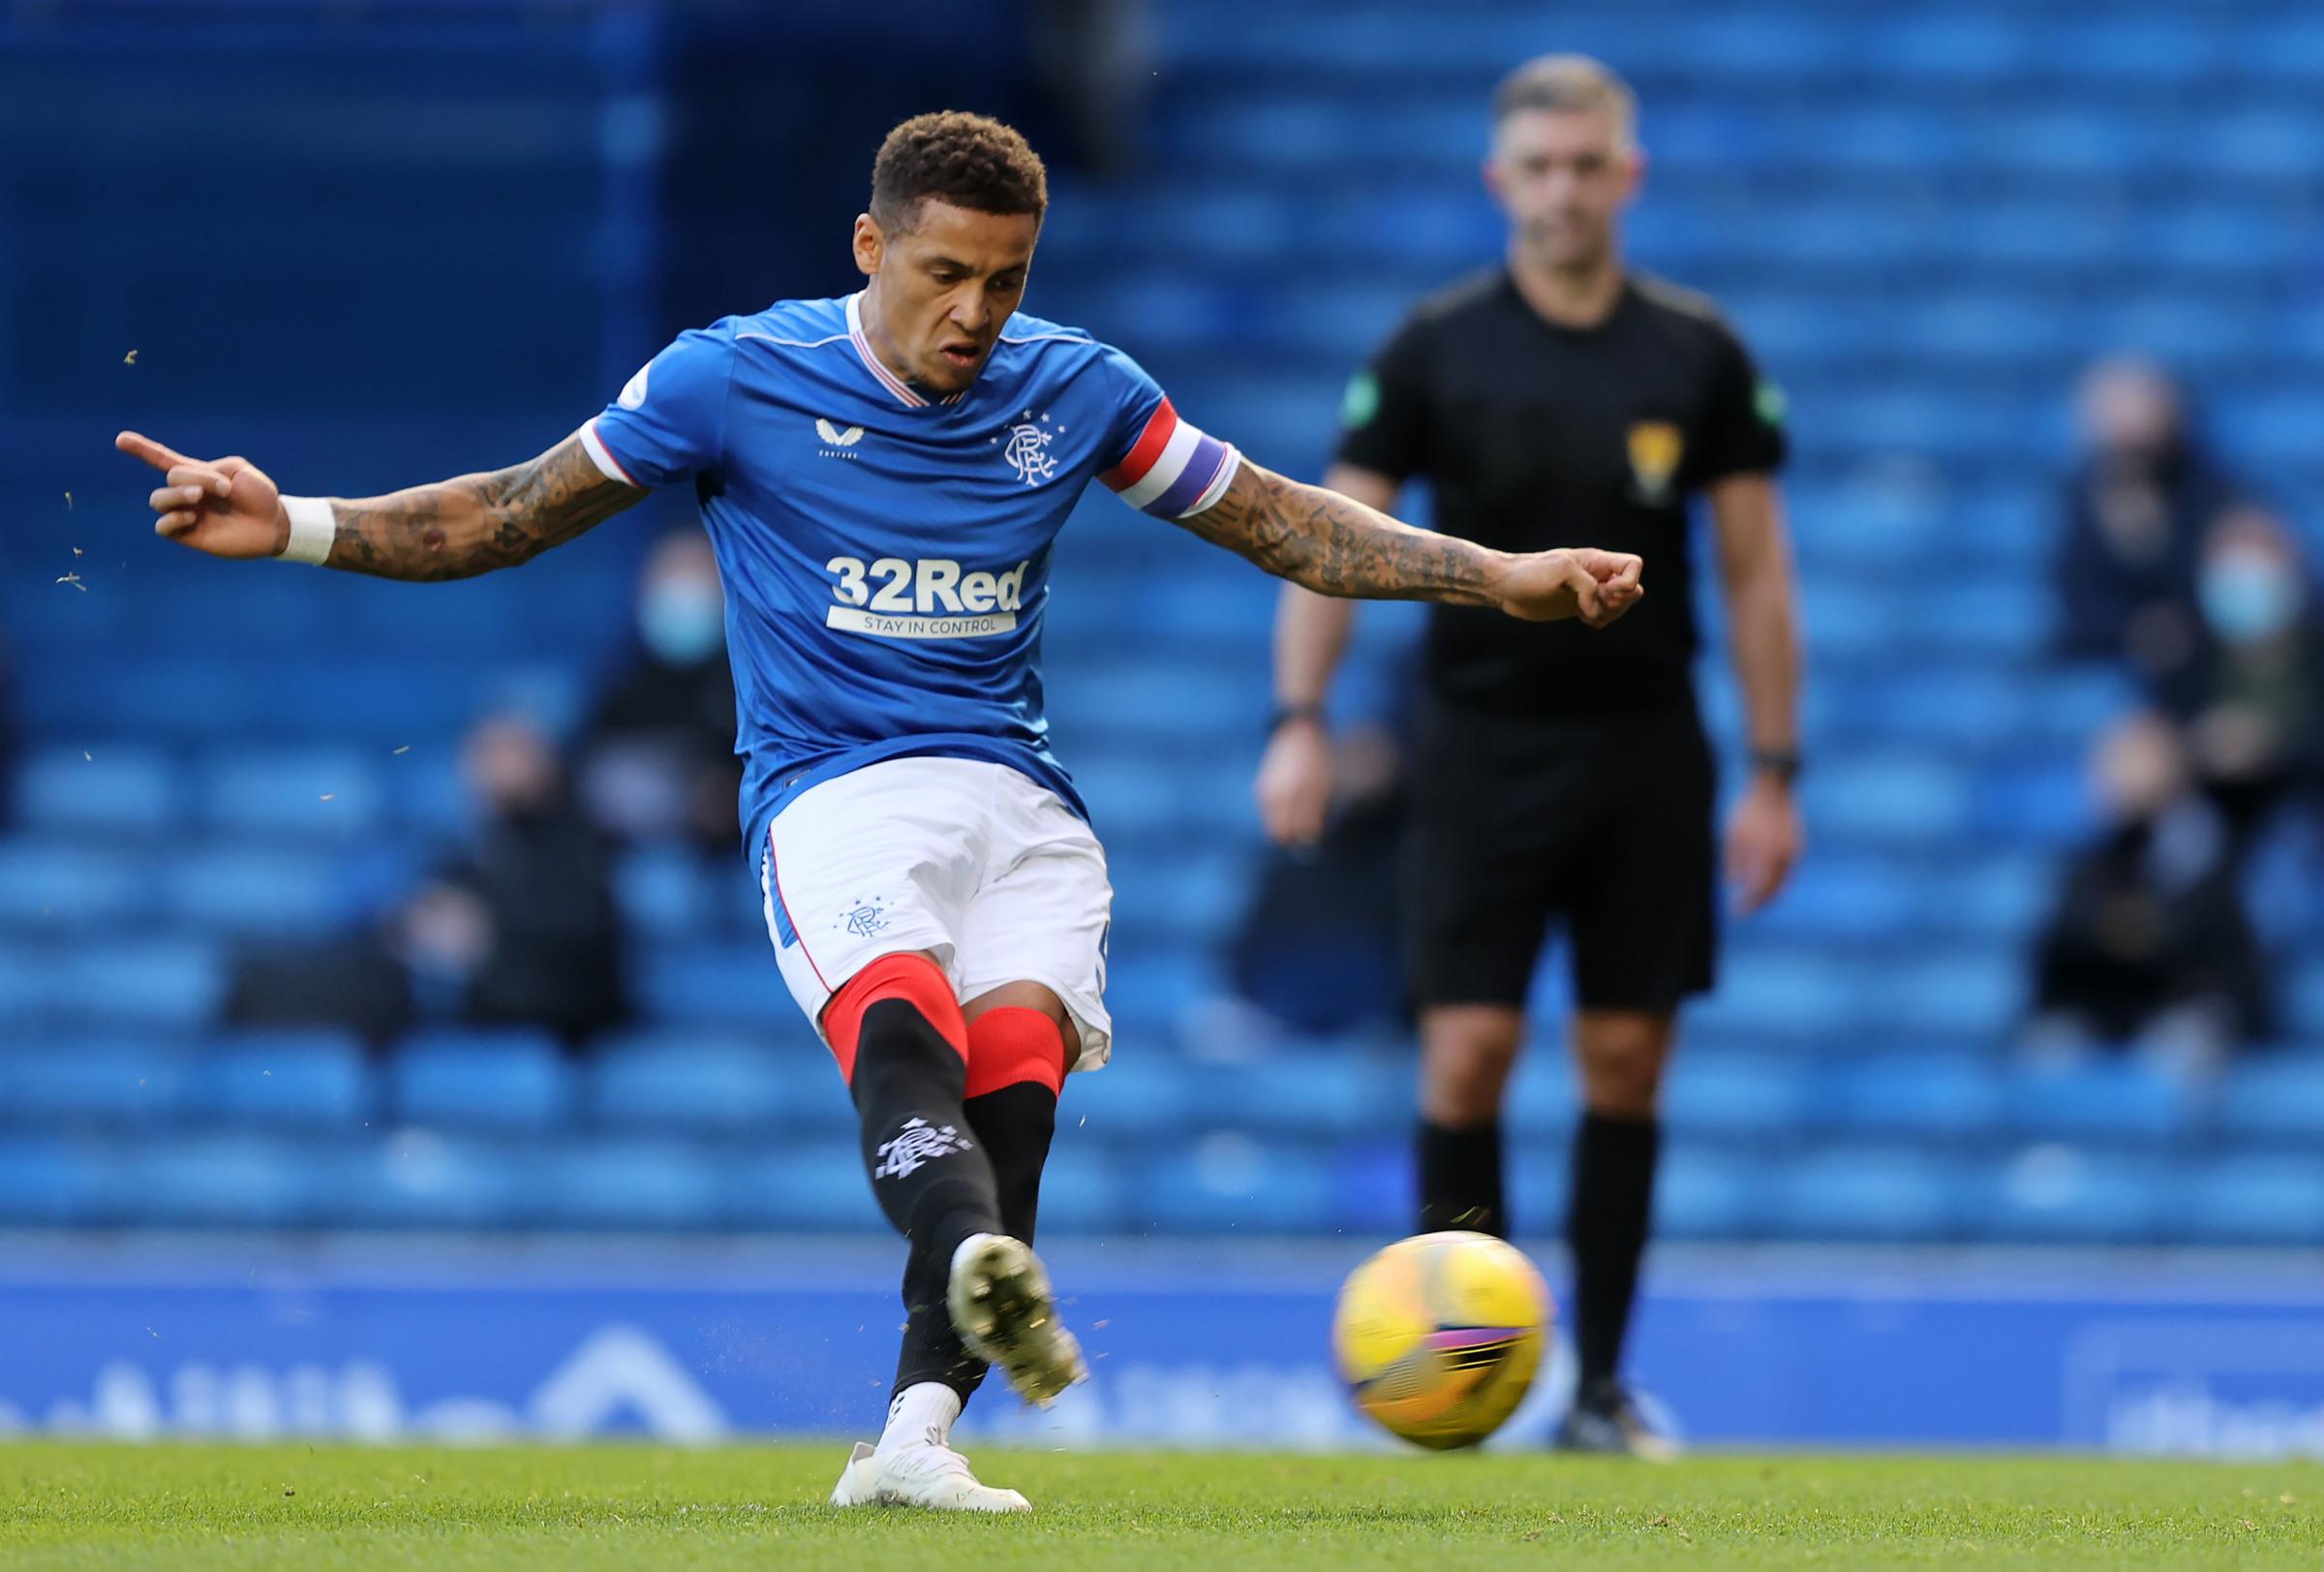 Rangers 1-0 Ross County LIVE: Tavernier opens the scoring after Morelos wins penalty